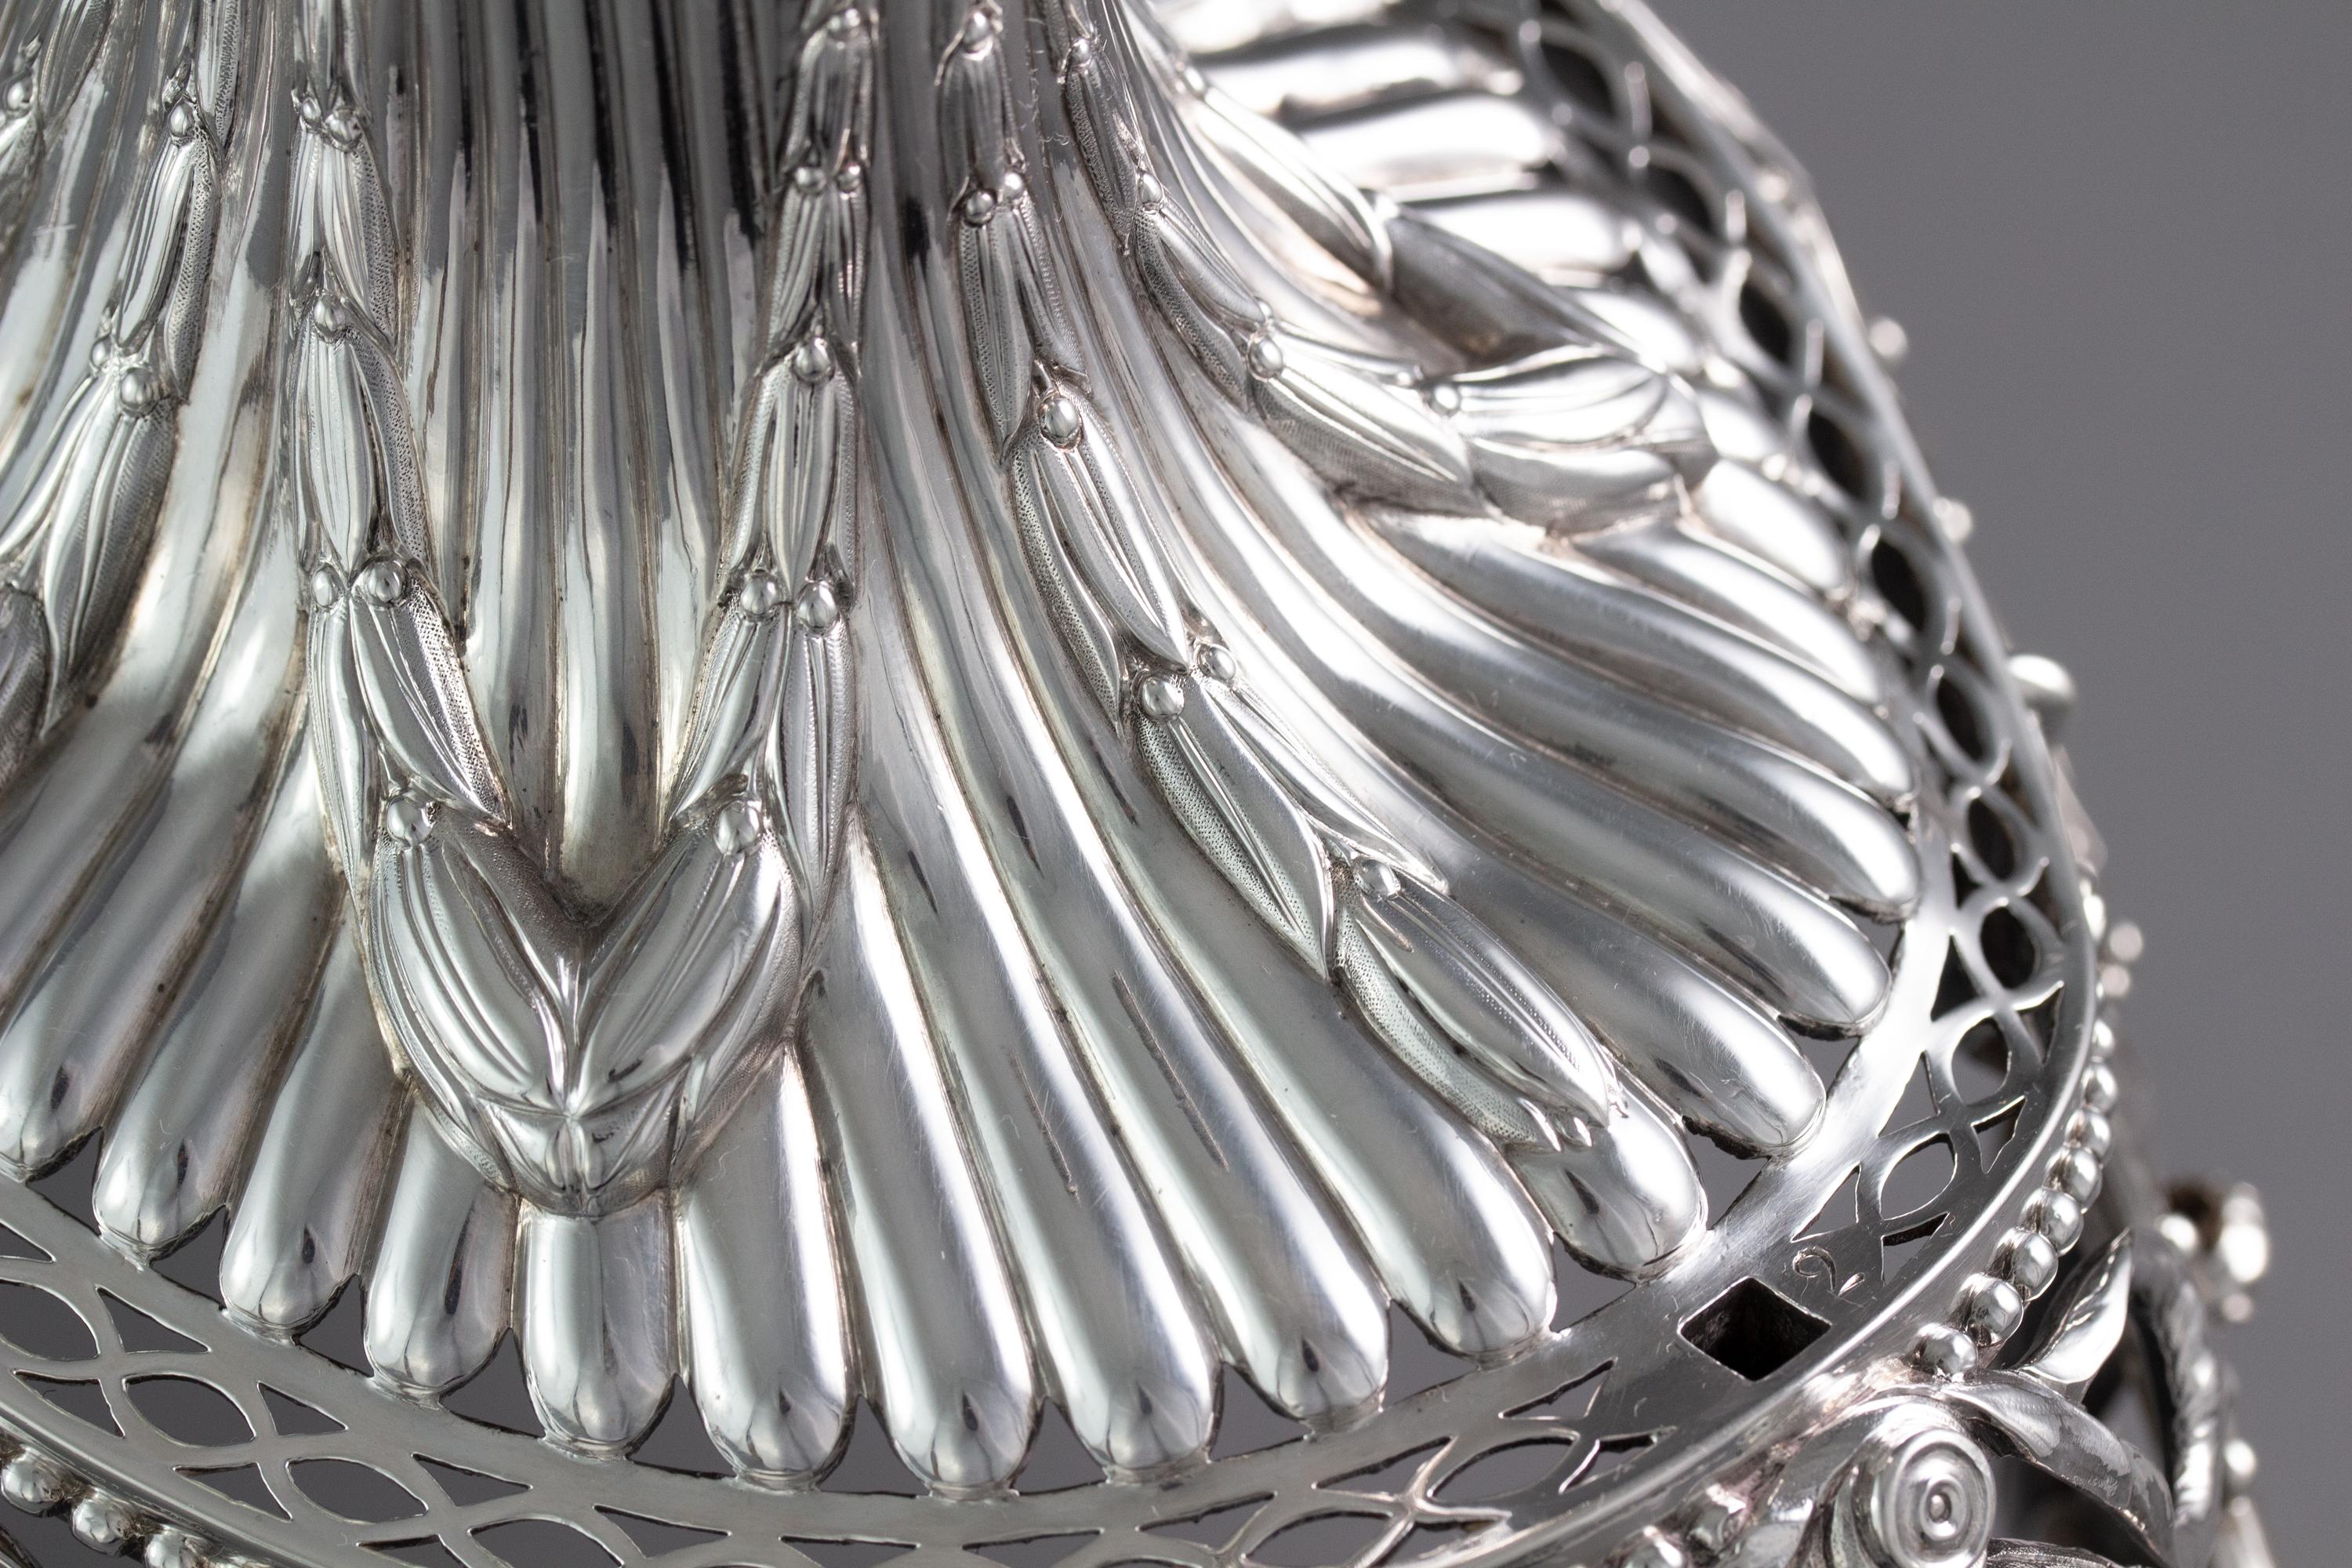 George III Silver Epergne or Table Centrepiece, Thomas Pitts, London 1773